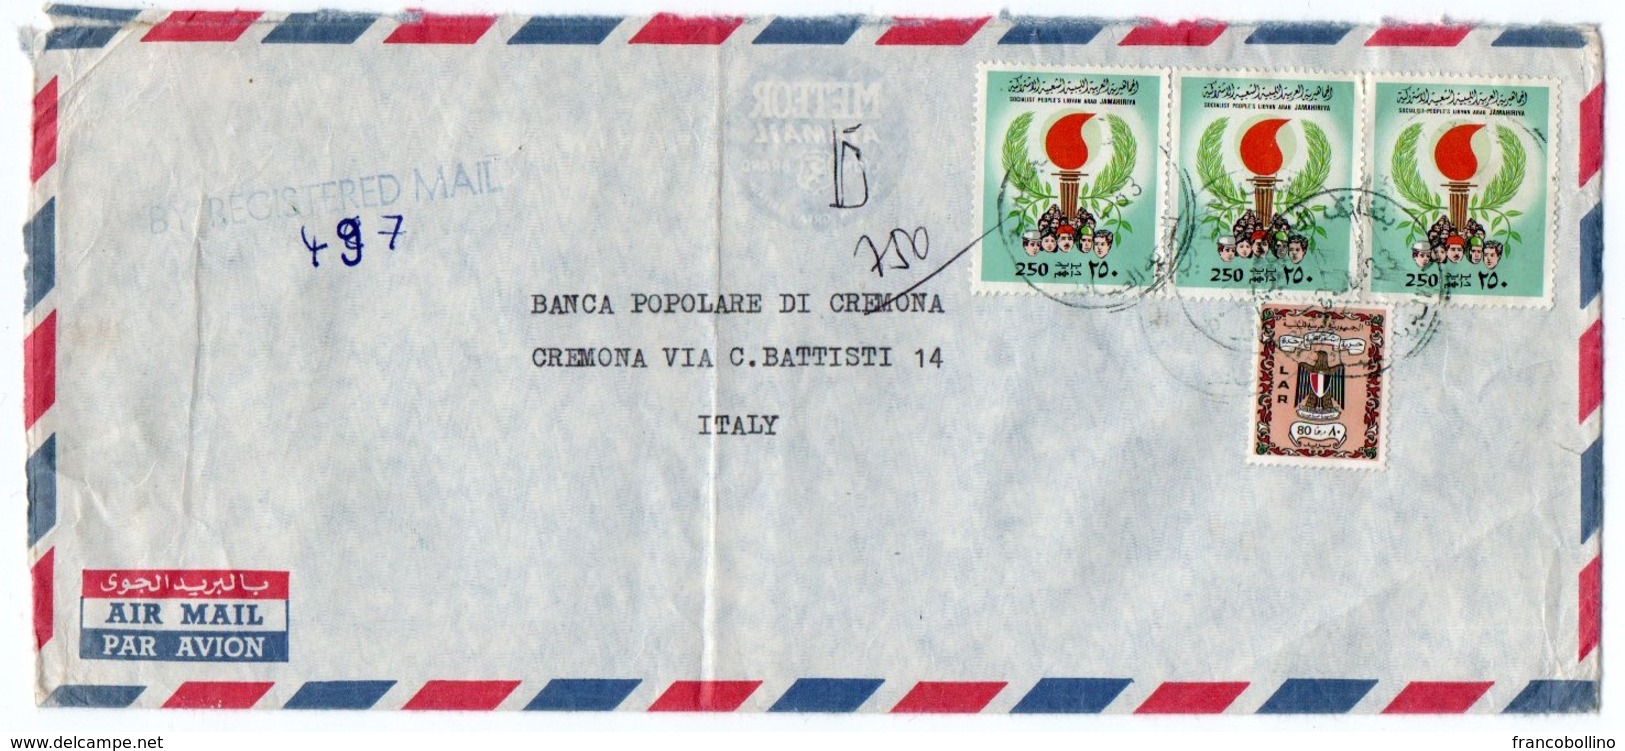 LIBYA - REGISTERE AIR MAIL COVER TO ITALY 1983 / WAHDA BANK S.A.L. - Libia